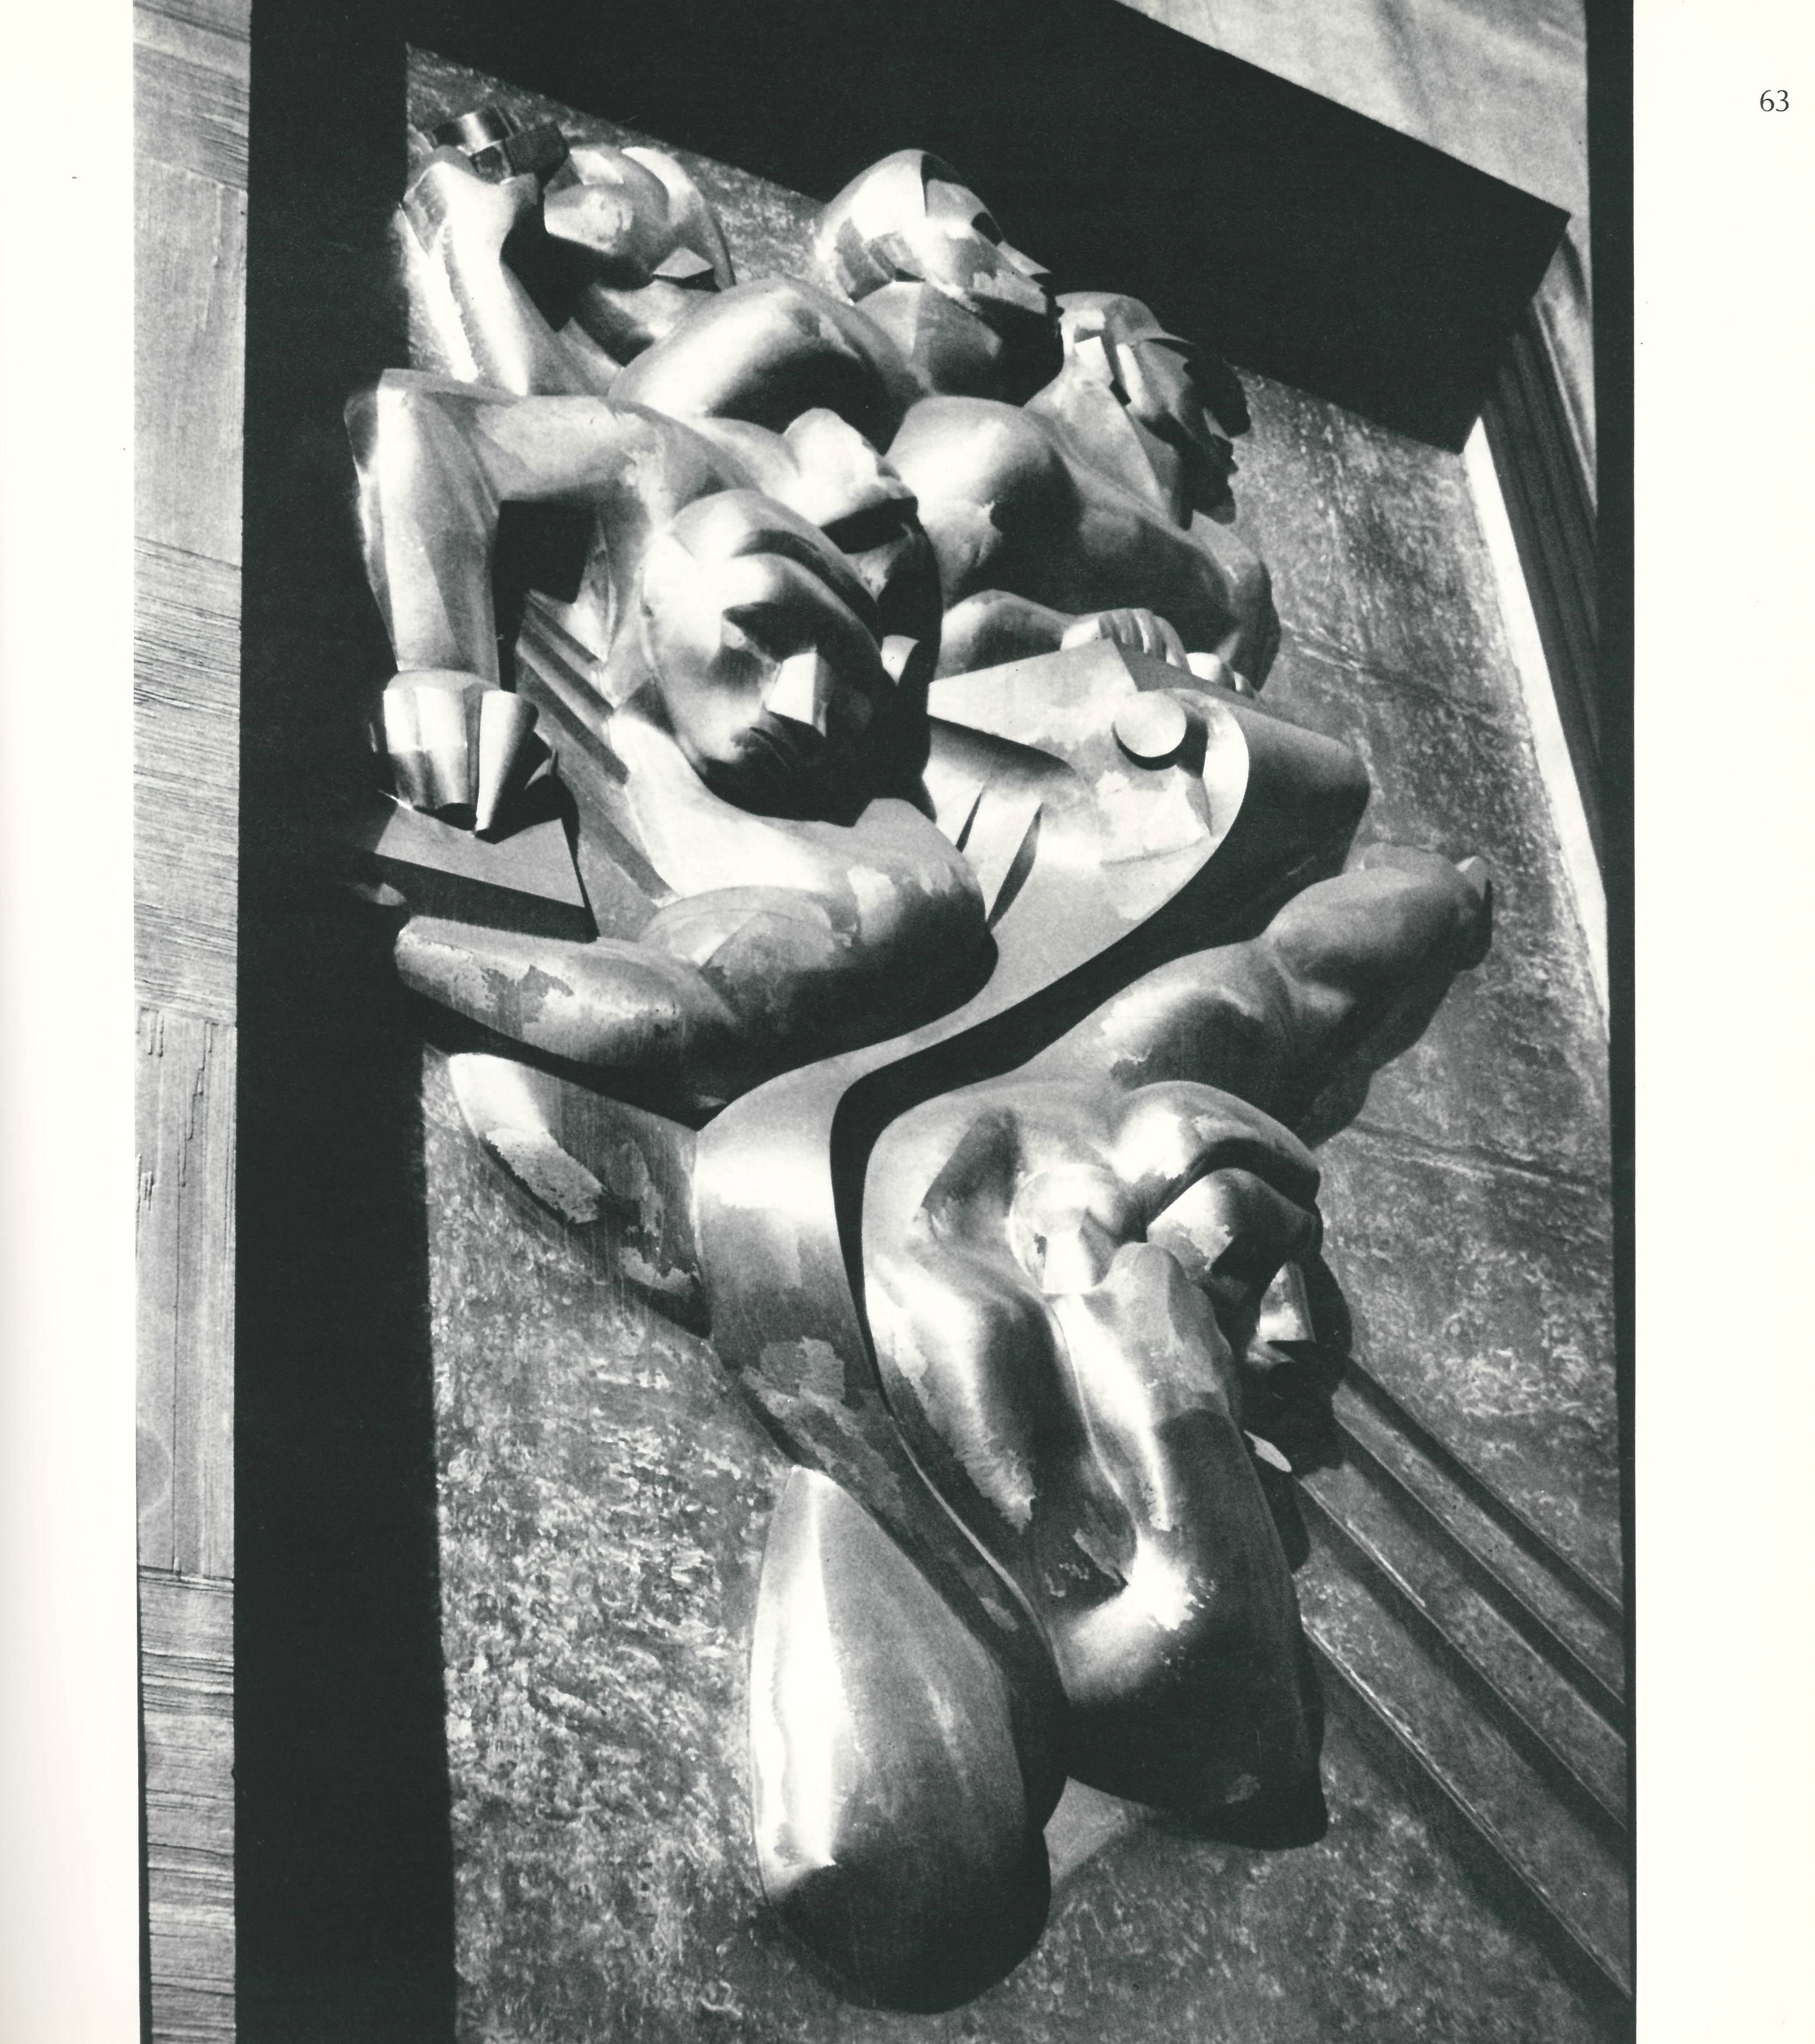 This large book is a monograph on the life and work of one of the 20th centuries best known sculptors. His father was Japanese and his mother American, he lived in Japan as a child and the later in America, he worked and studied in Europe with